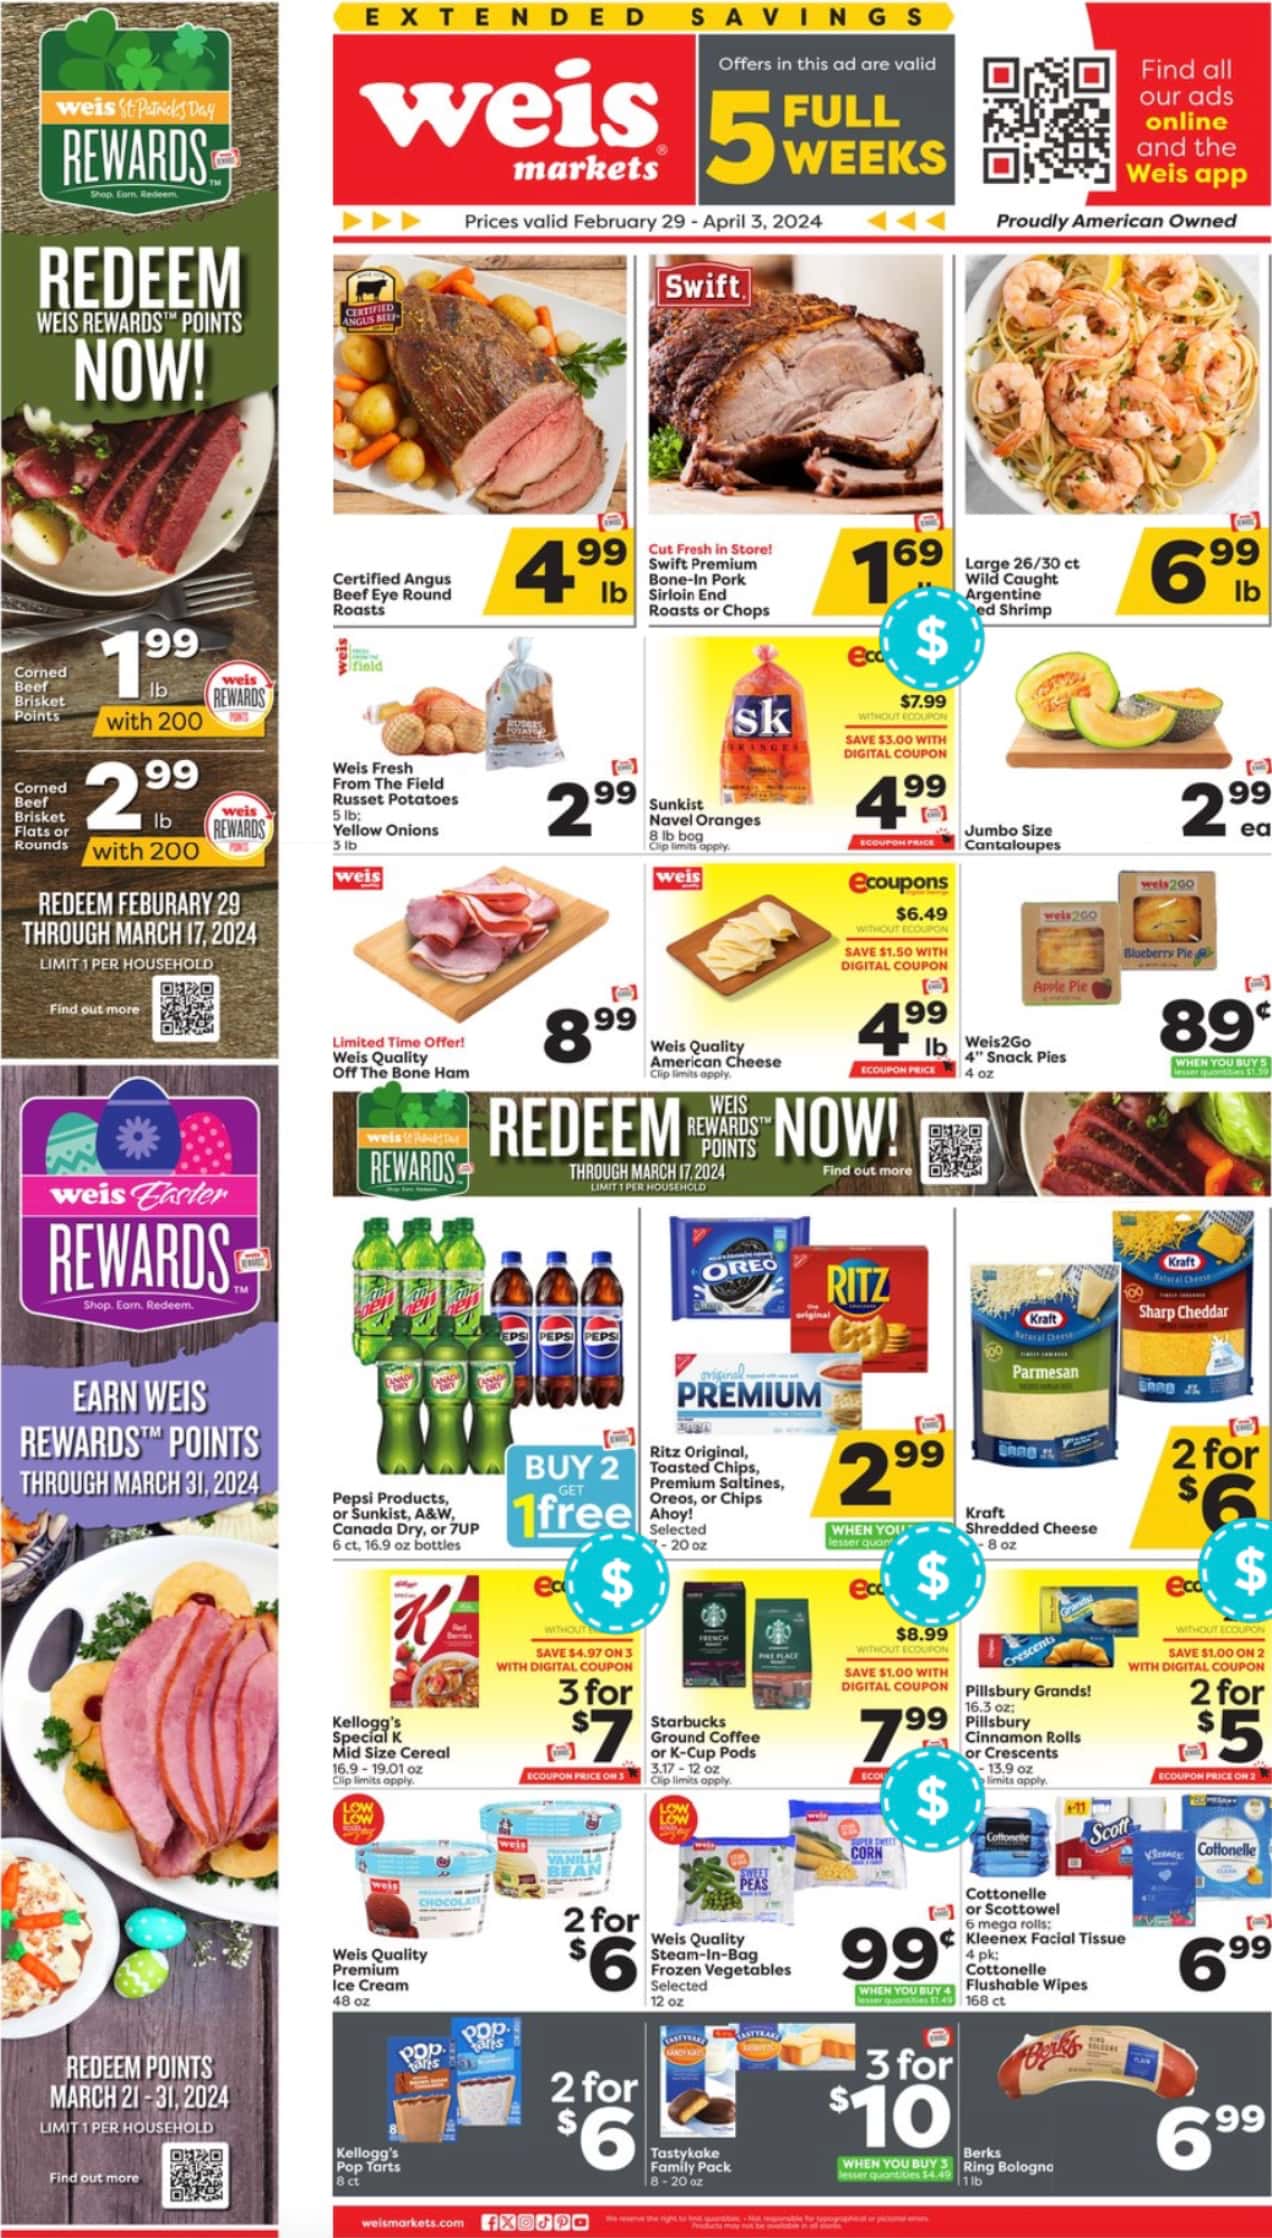 Weis_weekly_ad_022924_01